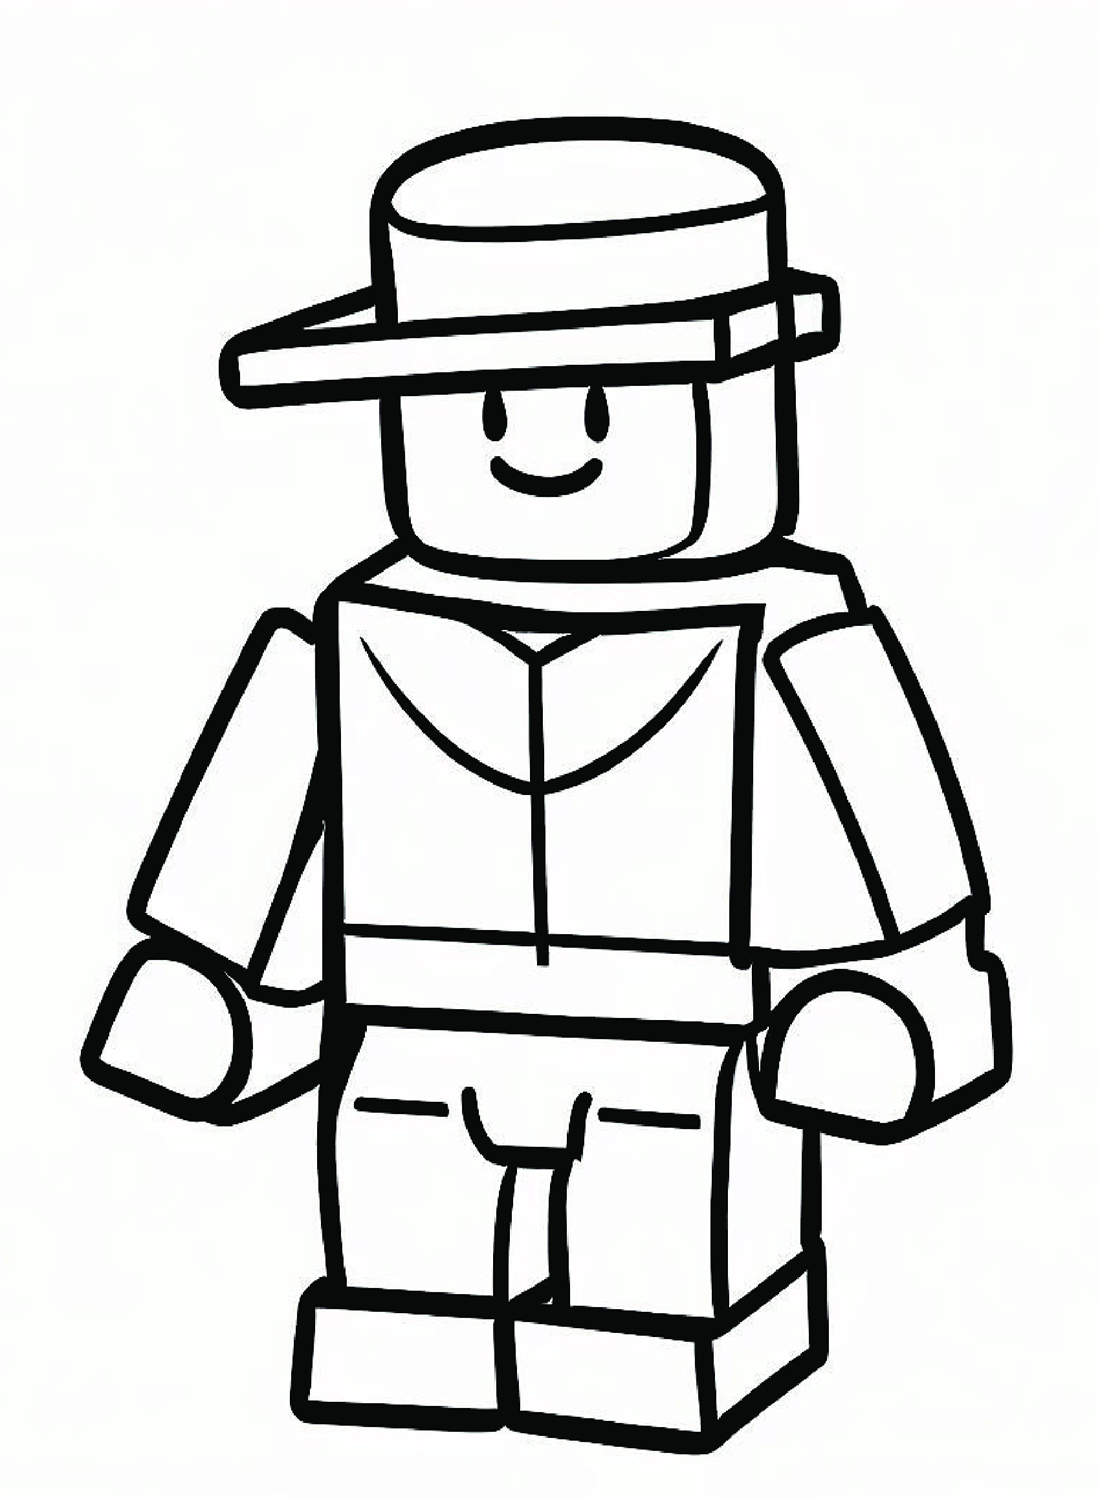 Roblox Coloring Pages PDF from Roblox